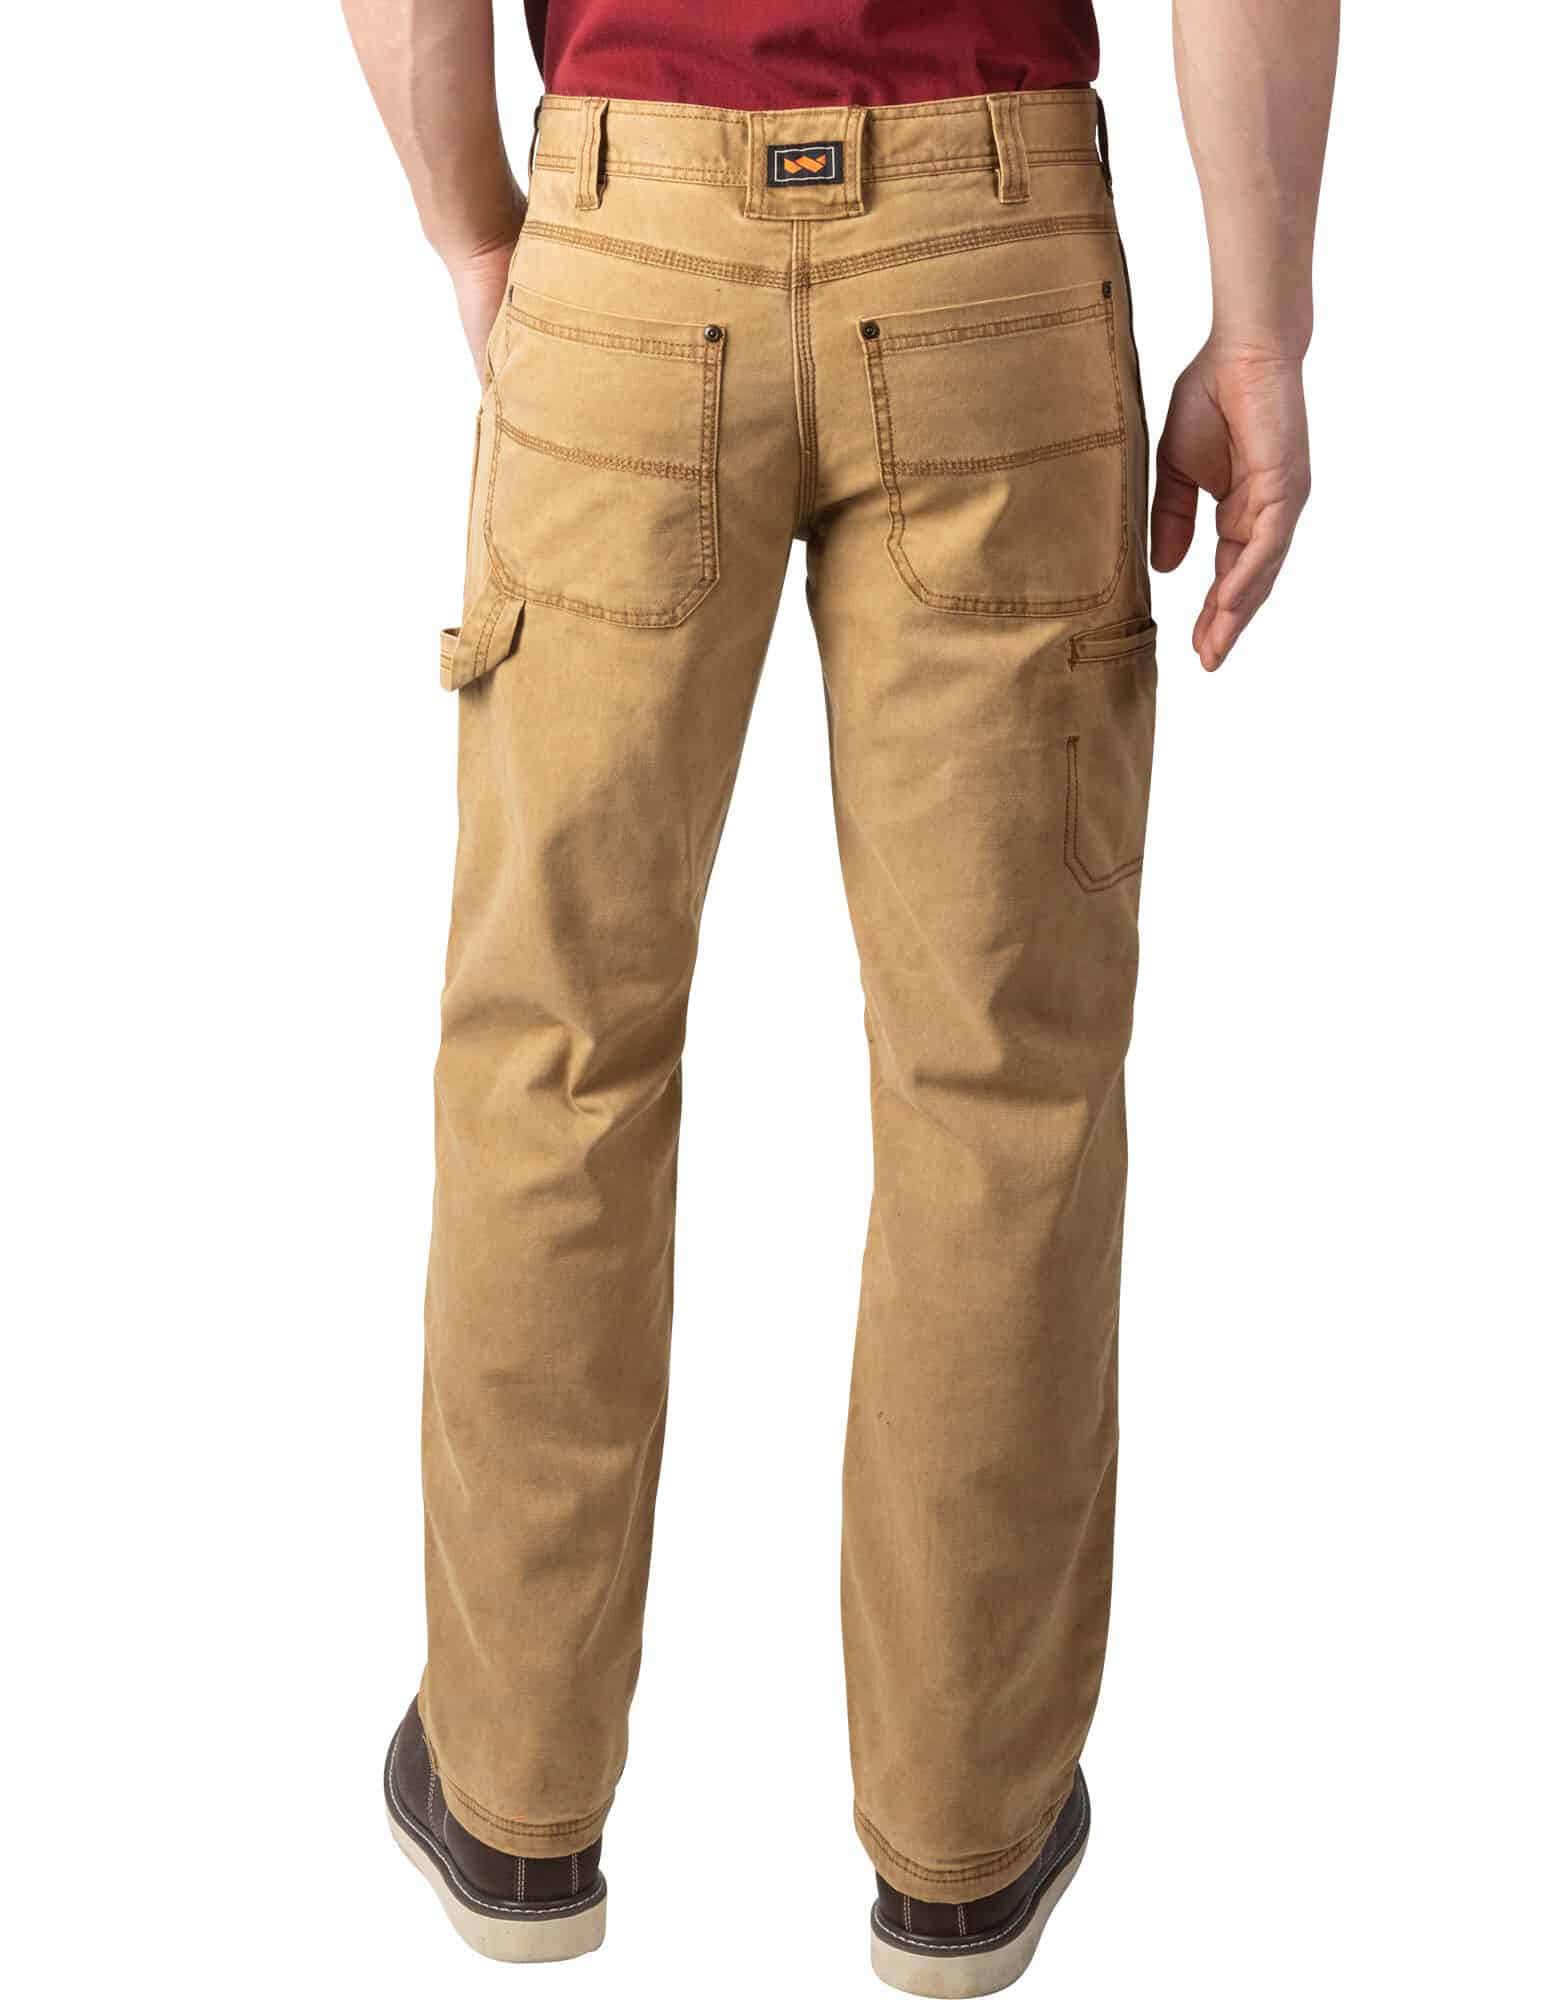 Walls men's flannel-lined duck work pants are perfect winter work clothing.